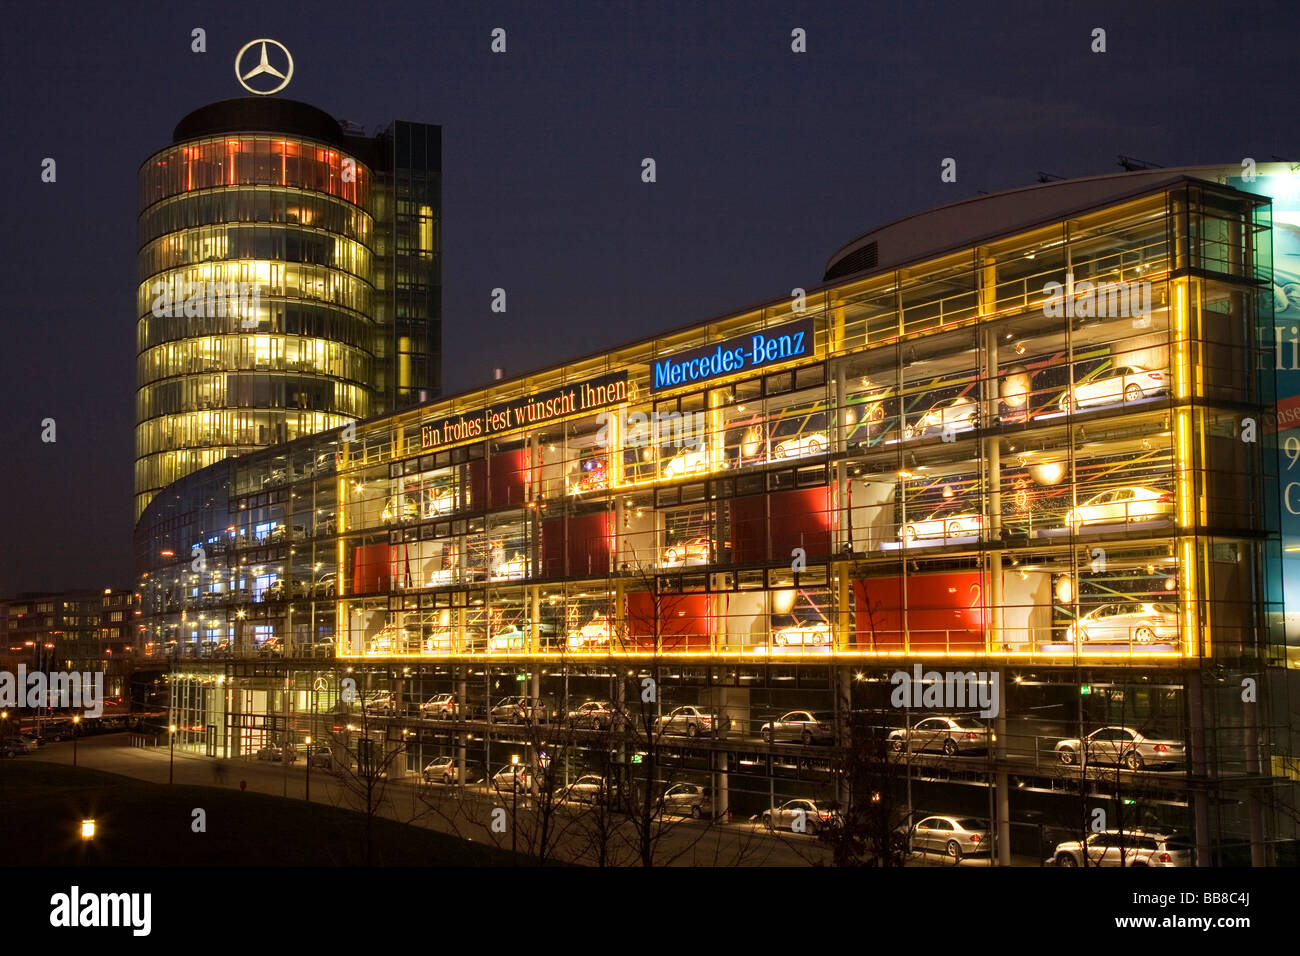 Car dealership decorated like an Advent calendar for Christmas at night, Munich, Upper Bavaria, Bavaria, Germany, Europe Stock Photo